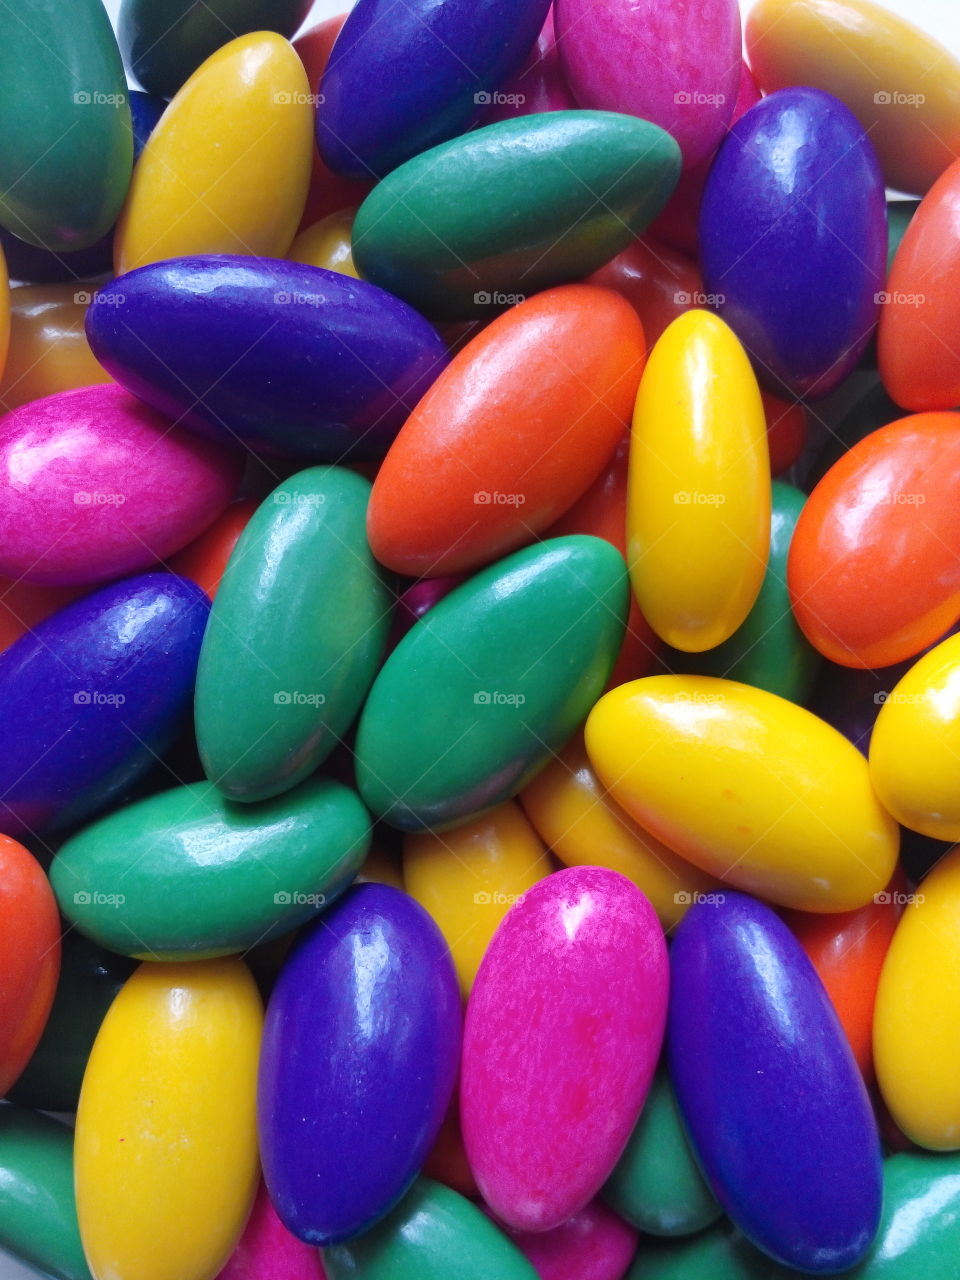 Candy coated almonds